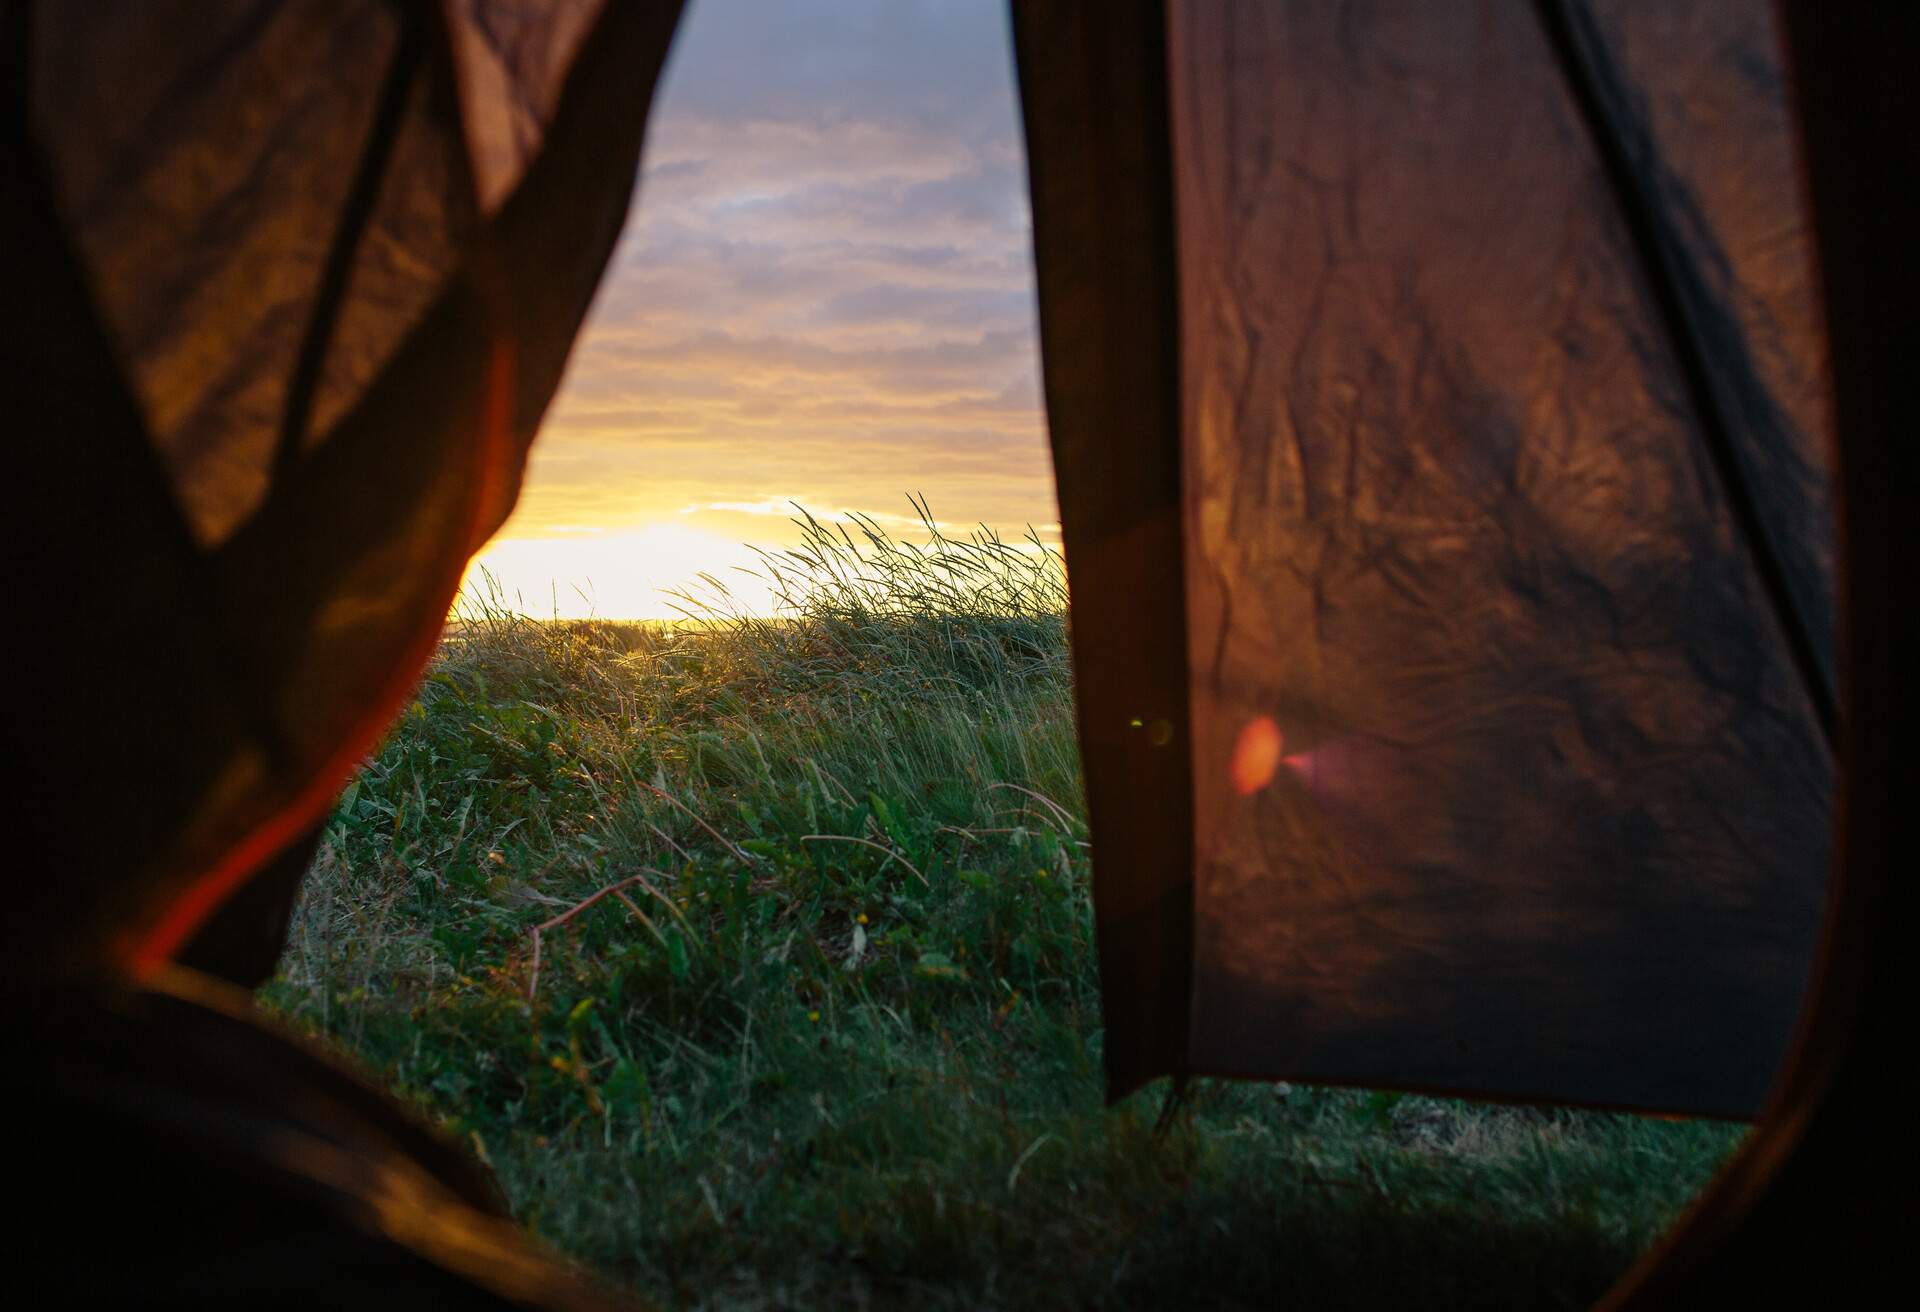 The open door of a tent overlooking the dramatic sunset and Breidaik beach in Iceland's westfjords